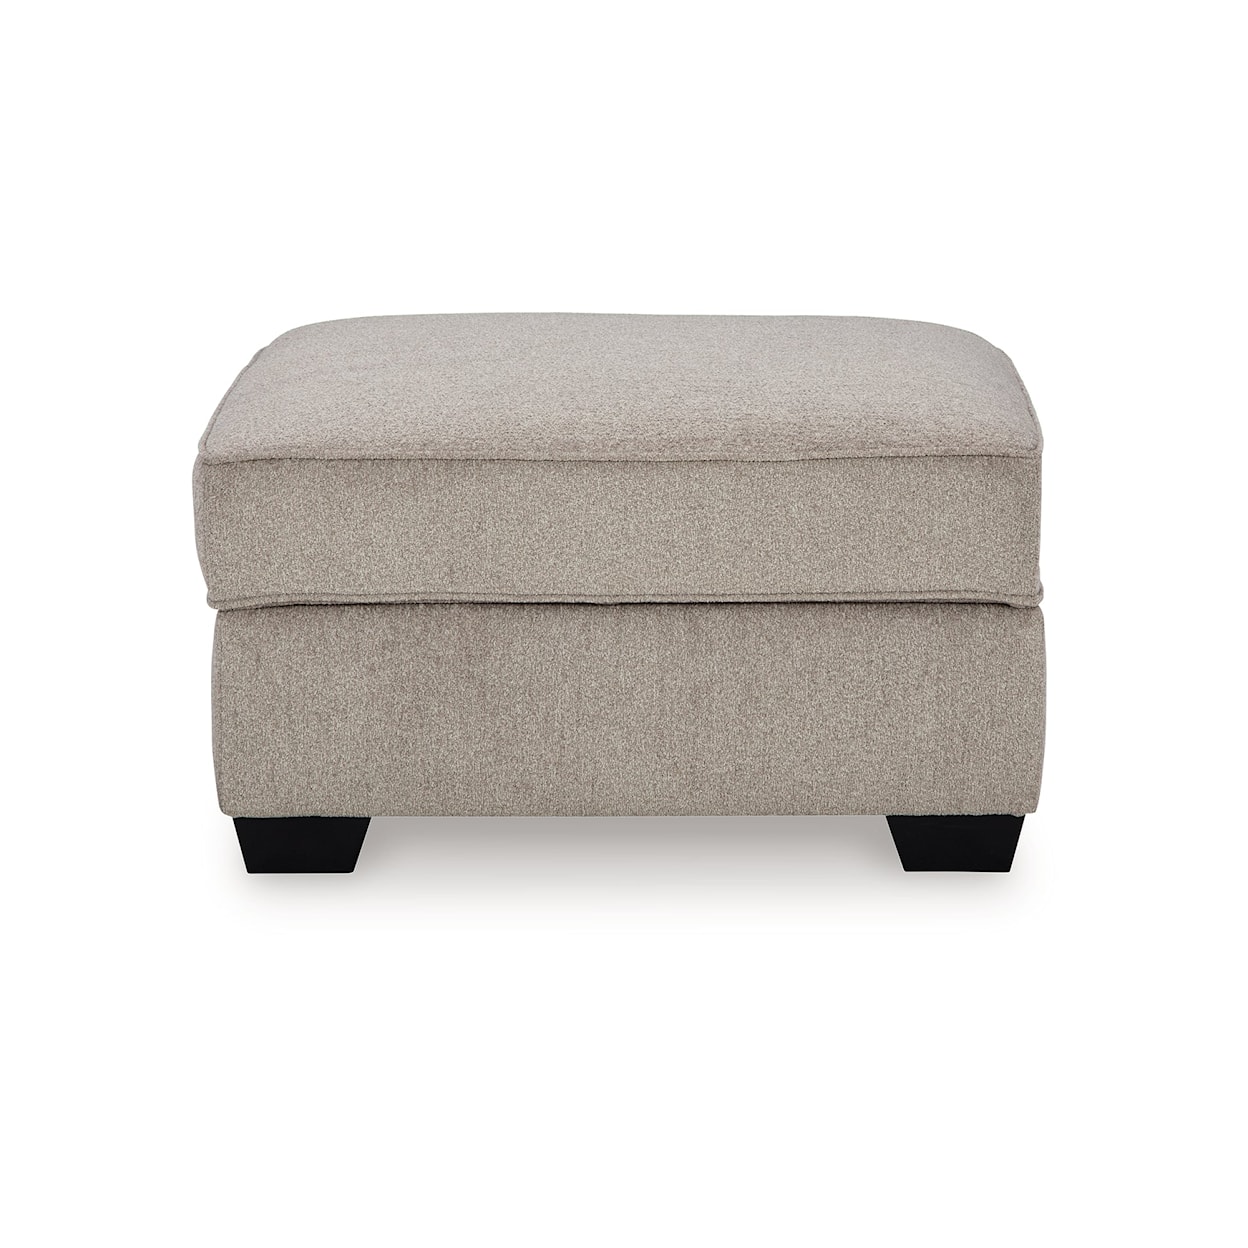 Signature Design by Ashley Furniture Claireah Ottoman With Storage